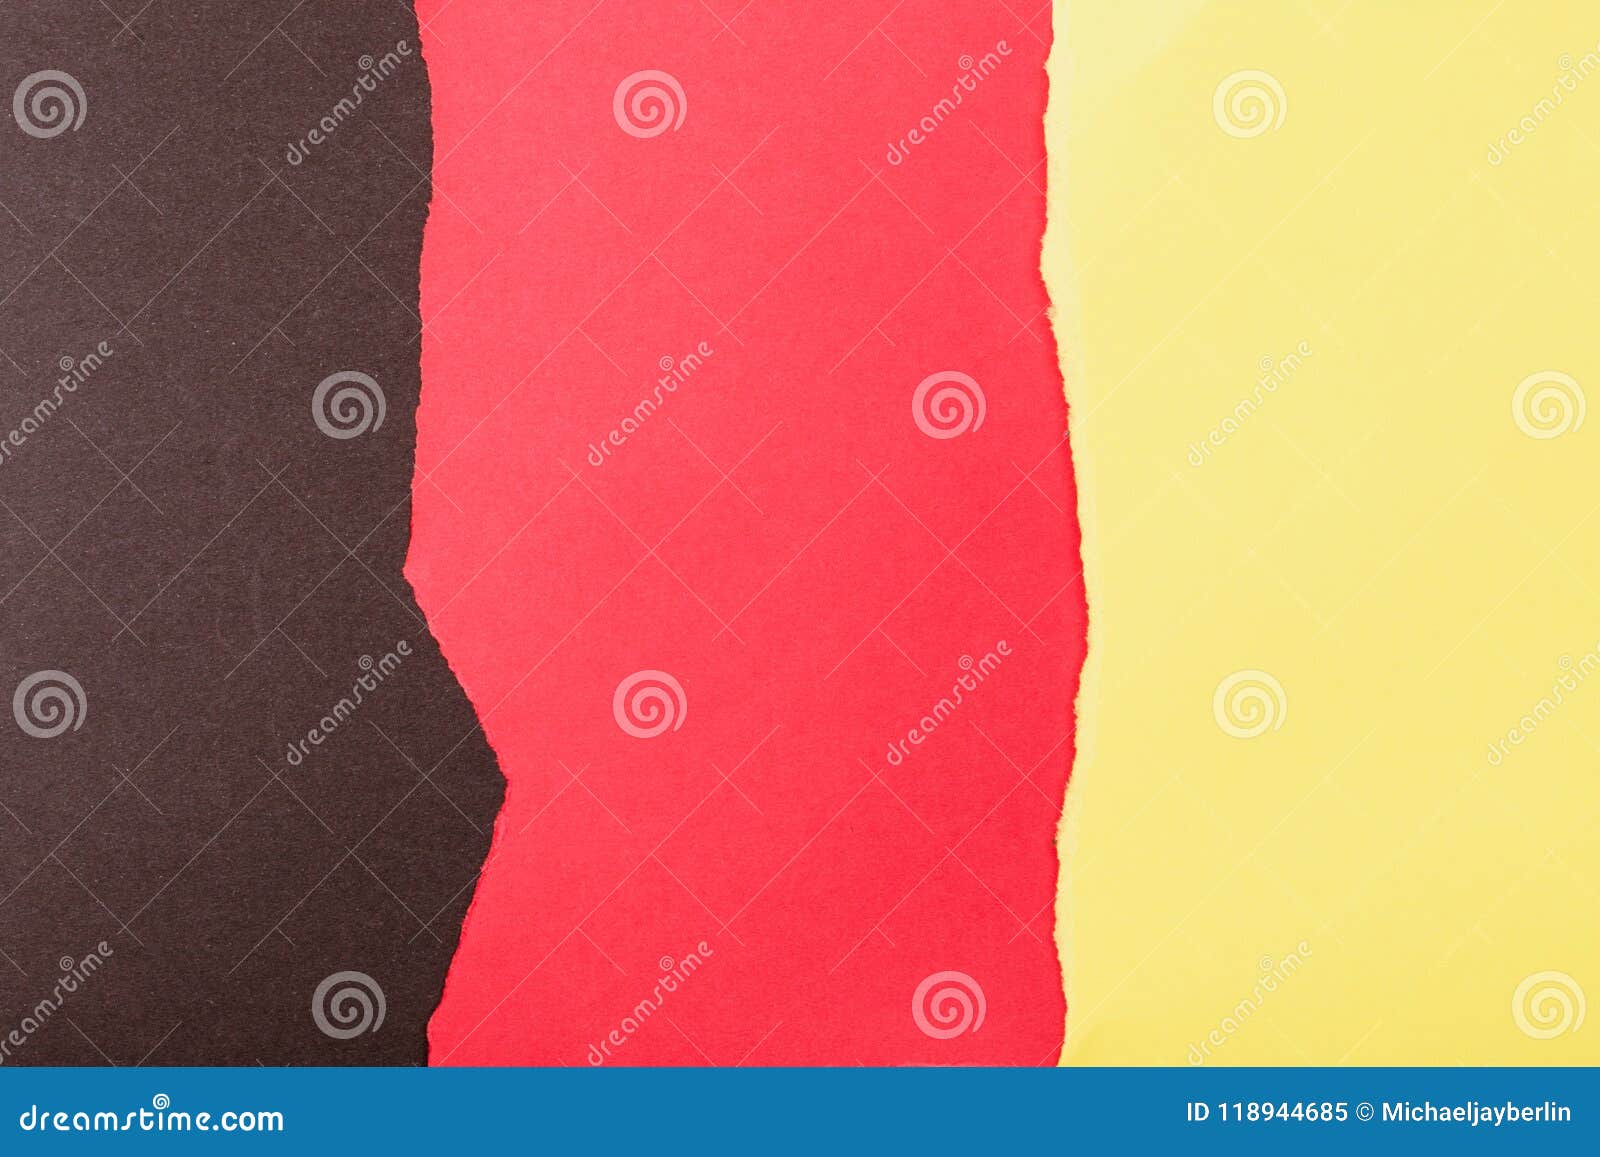 Germany Flag Made From Ripped Shreds Of Paper Stock Image Image Of Craft Paper